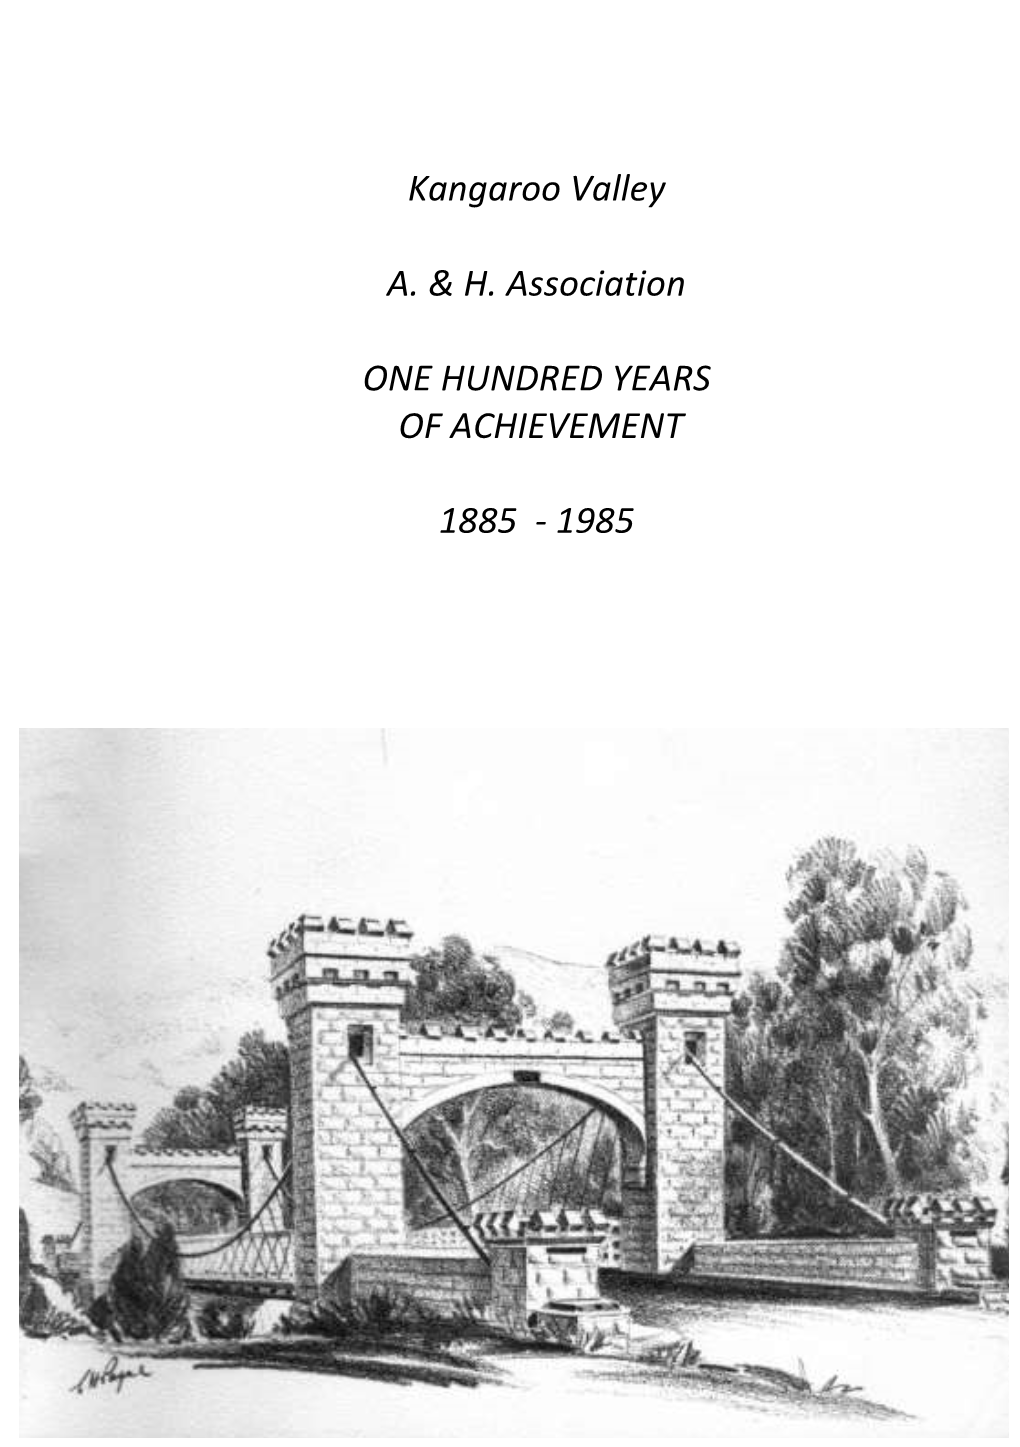 Kangaroo Valley A. & H. Association ONE HUNDRED YEARS OF